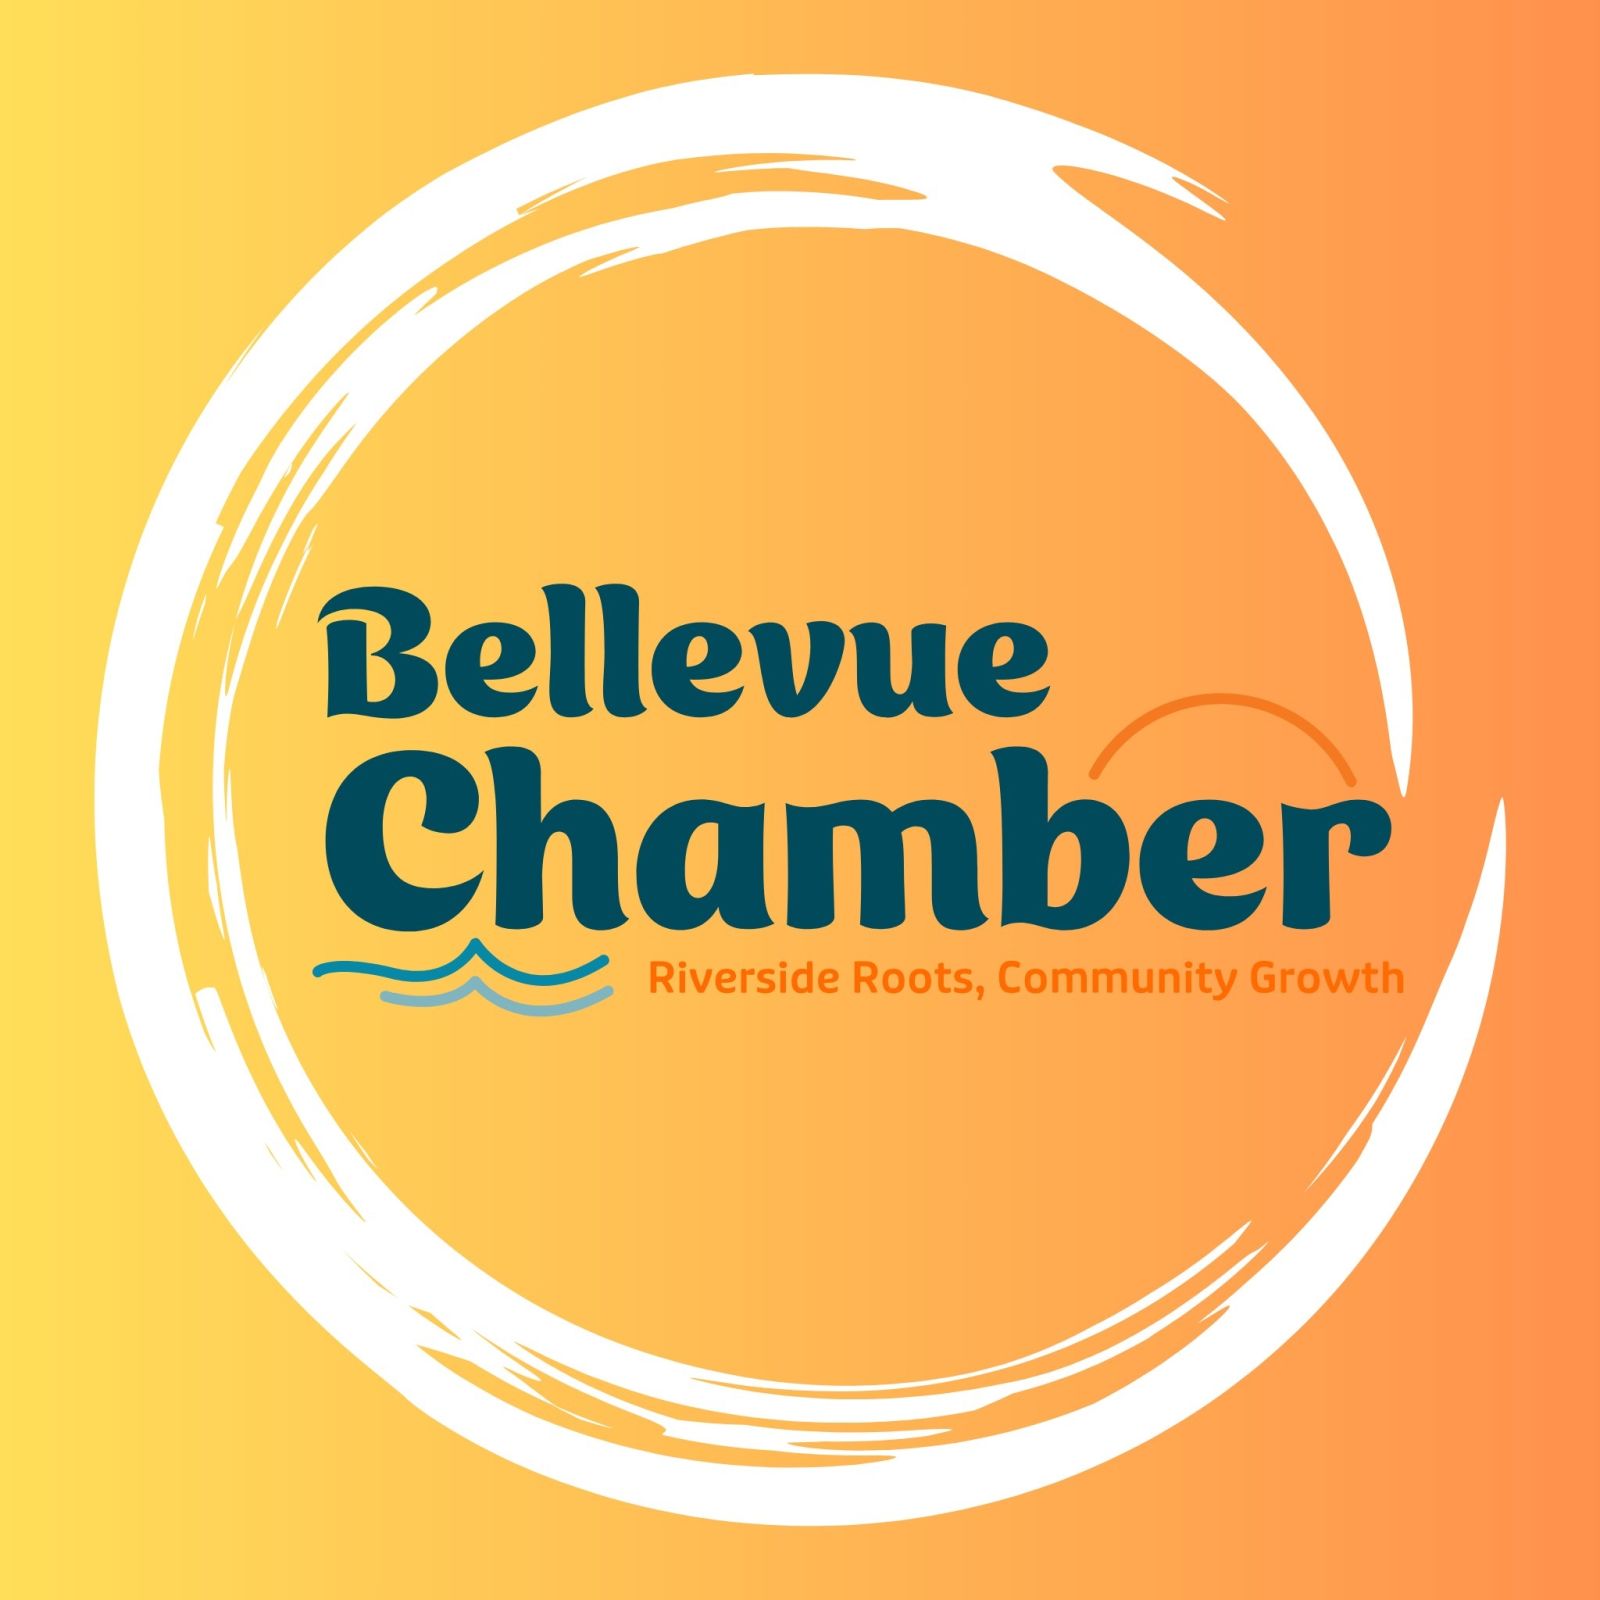 Bellevue Chamber of Commerce's Image